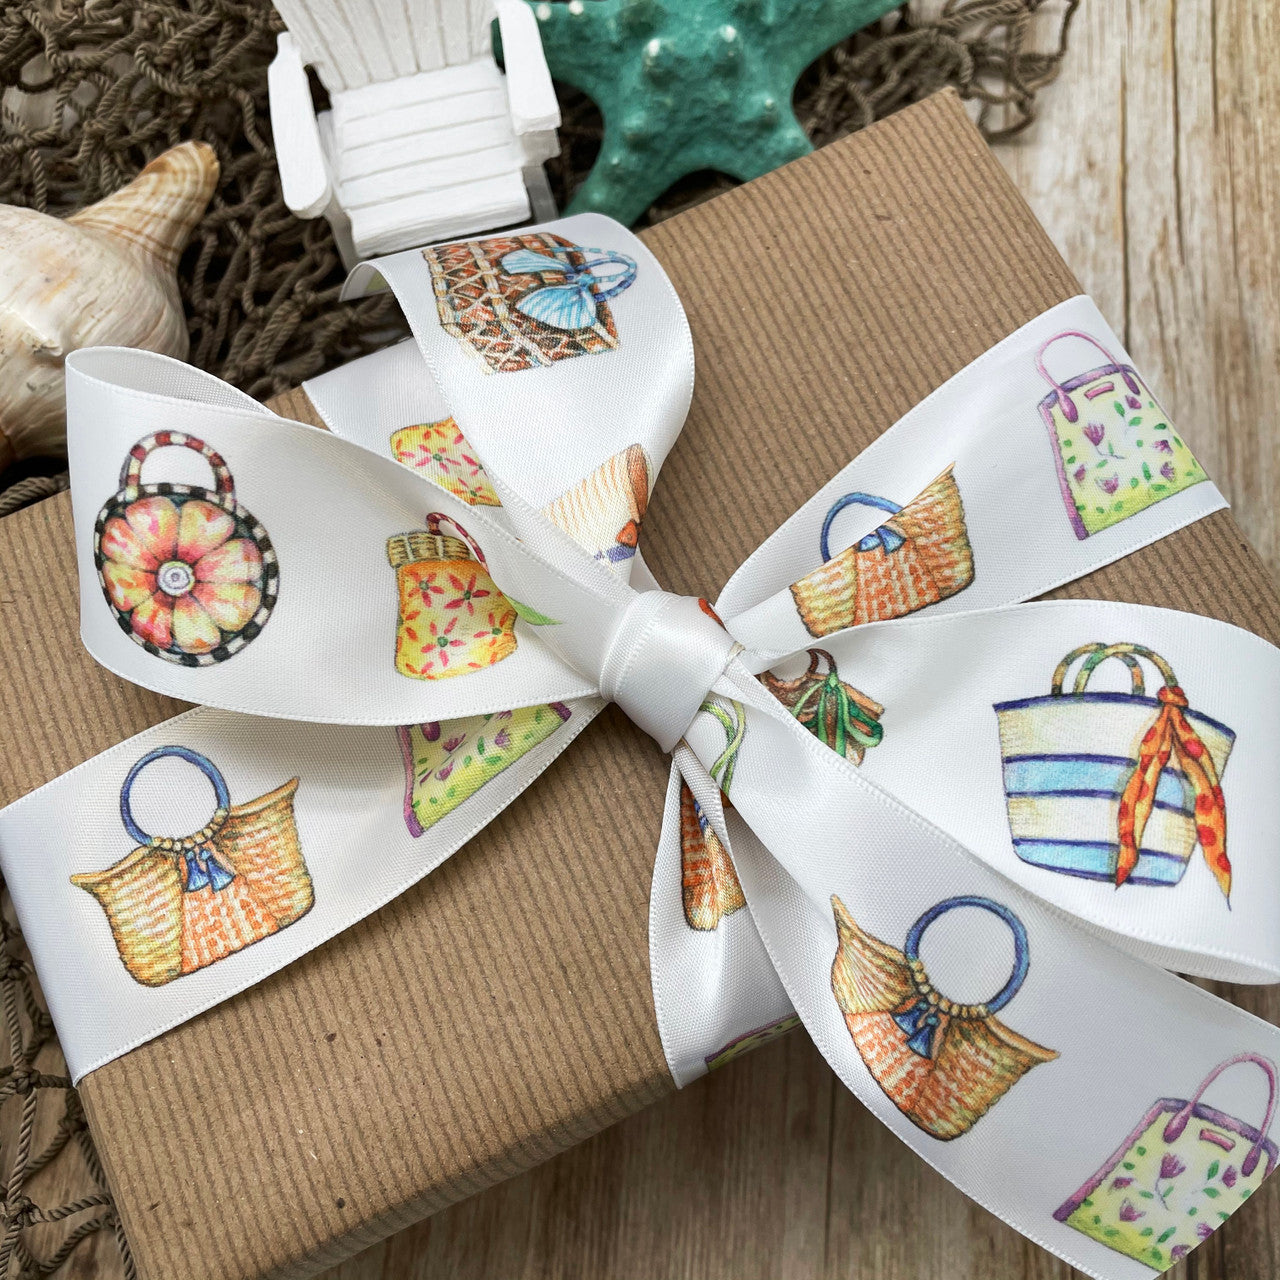 Tie a special Summer gift or bridal shower gift with our watercolor baskets for a very special touch!